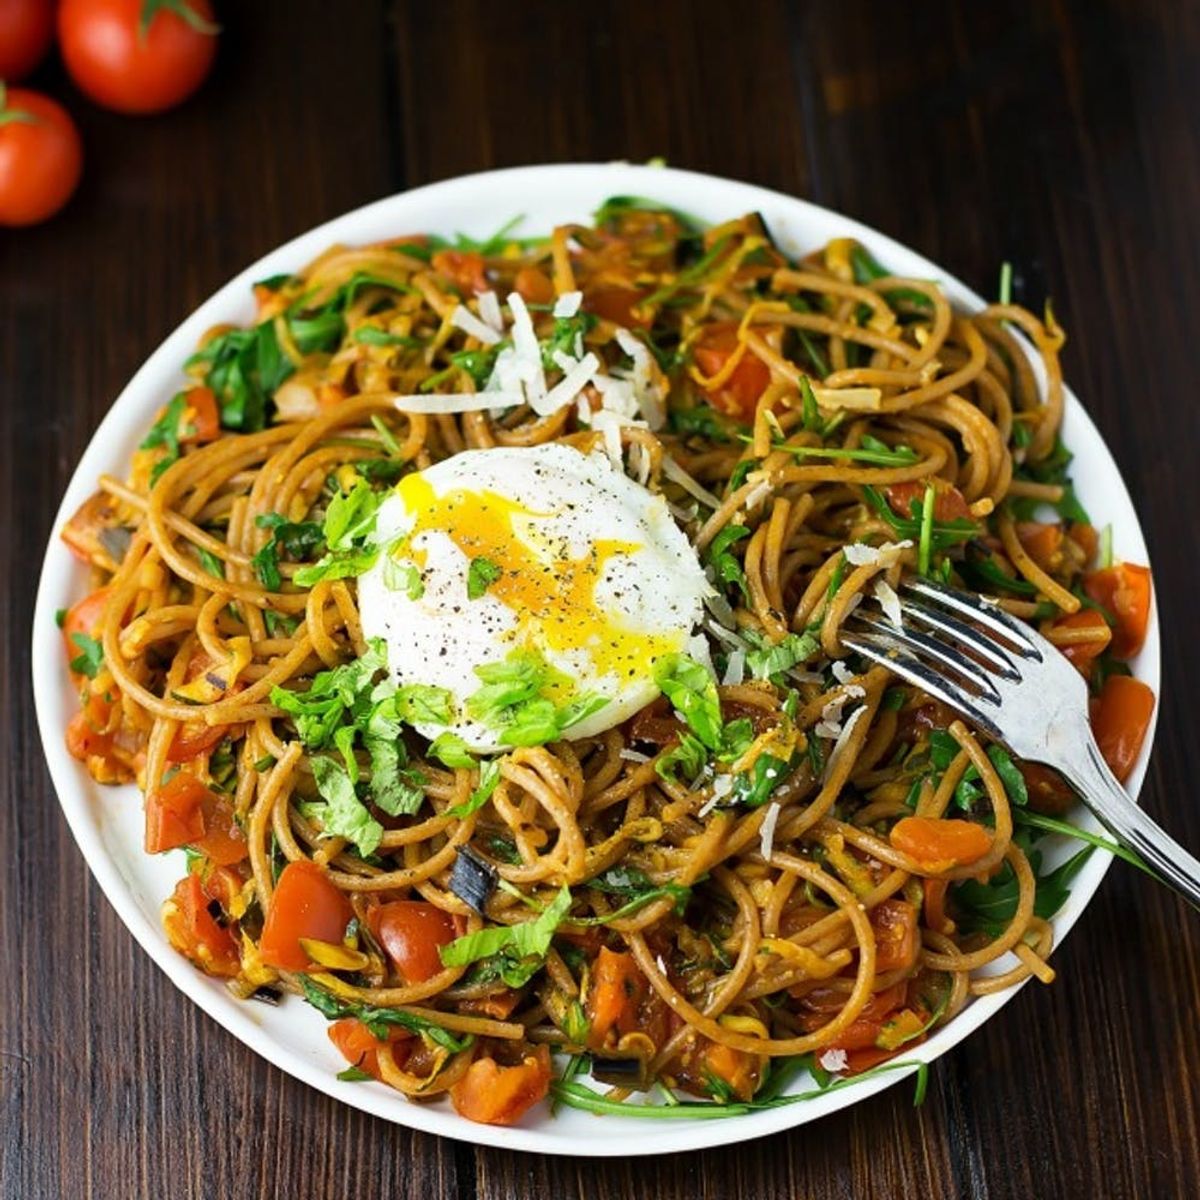 15 Whole-Grain Pasta Recipes for a Comfort Food Healthy Makeover